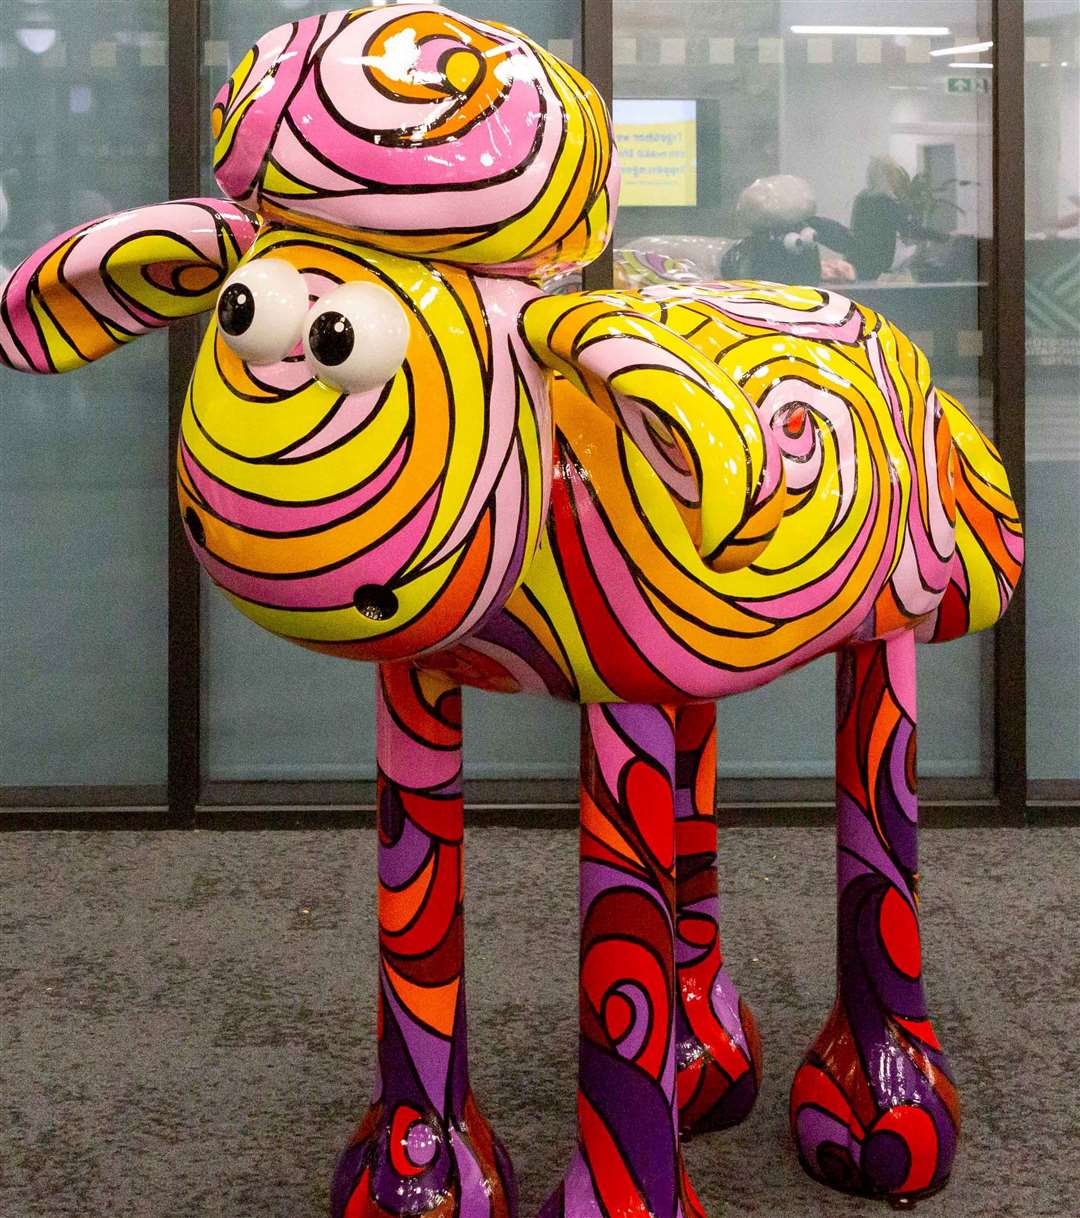 Shaun the sheep sculptures will feature in next summer's trail. Picture: Caroline Edmunds